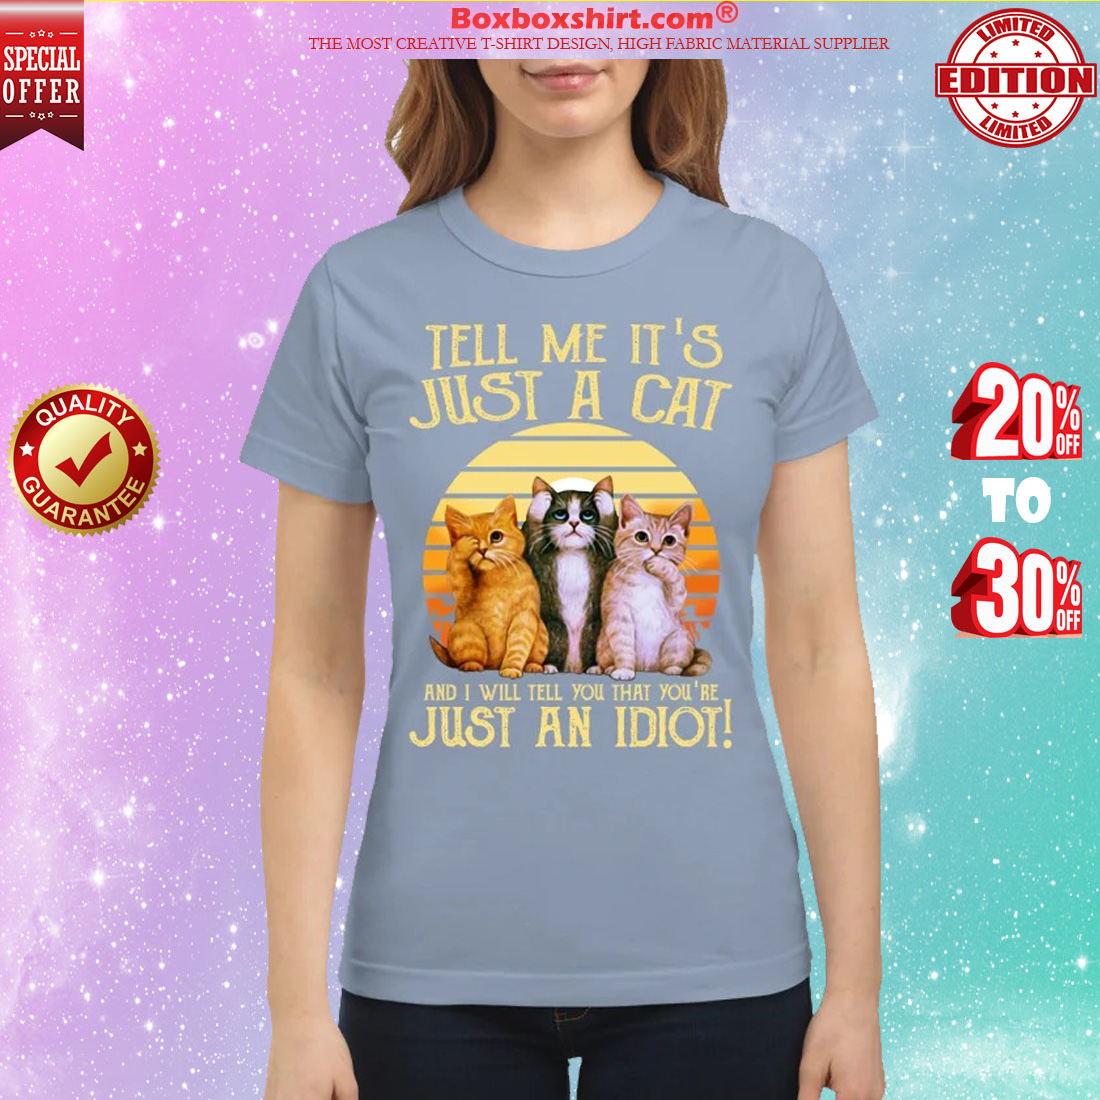 Tell me it's just a cat and I will tell you that you're just an idiot classic shirt